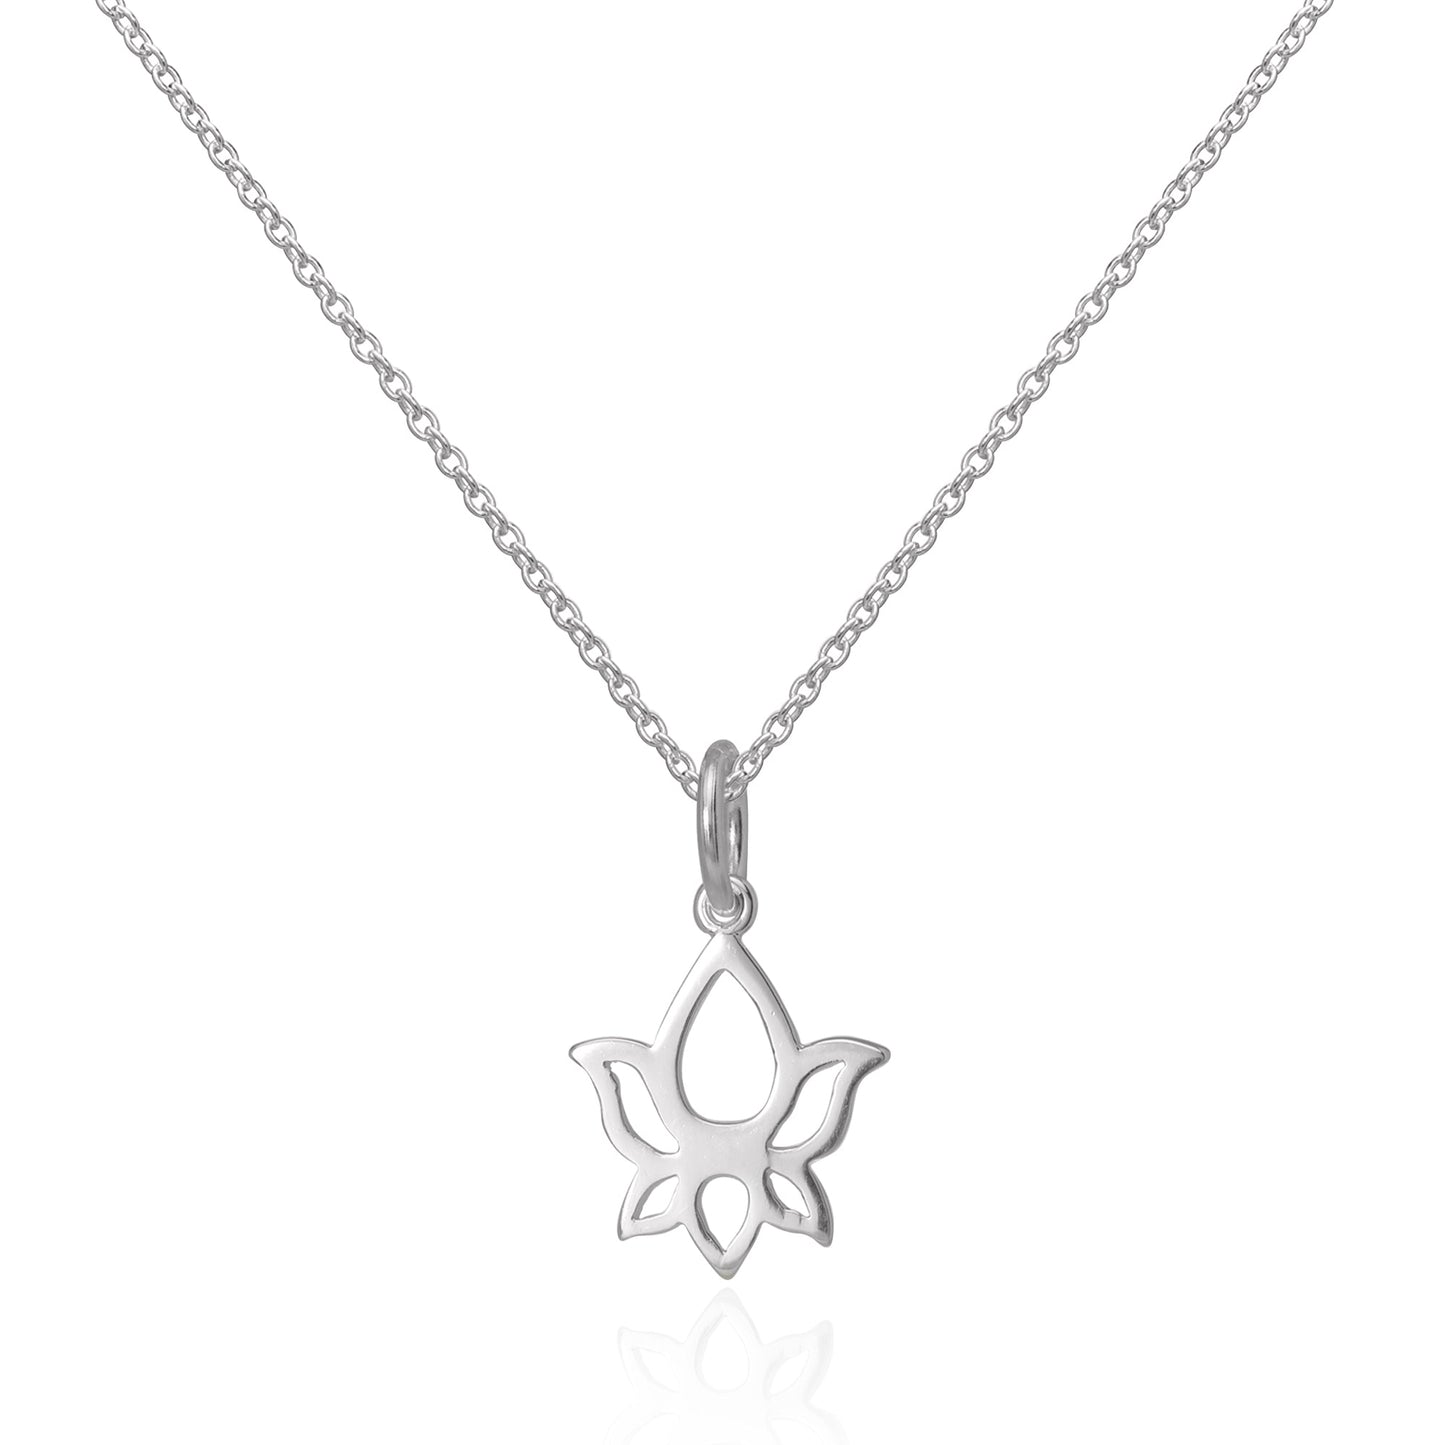 Sterling Silver Cut Out Lotus Flower Outline Pendant Necklace 16 - 22 Inches